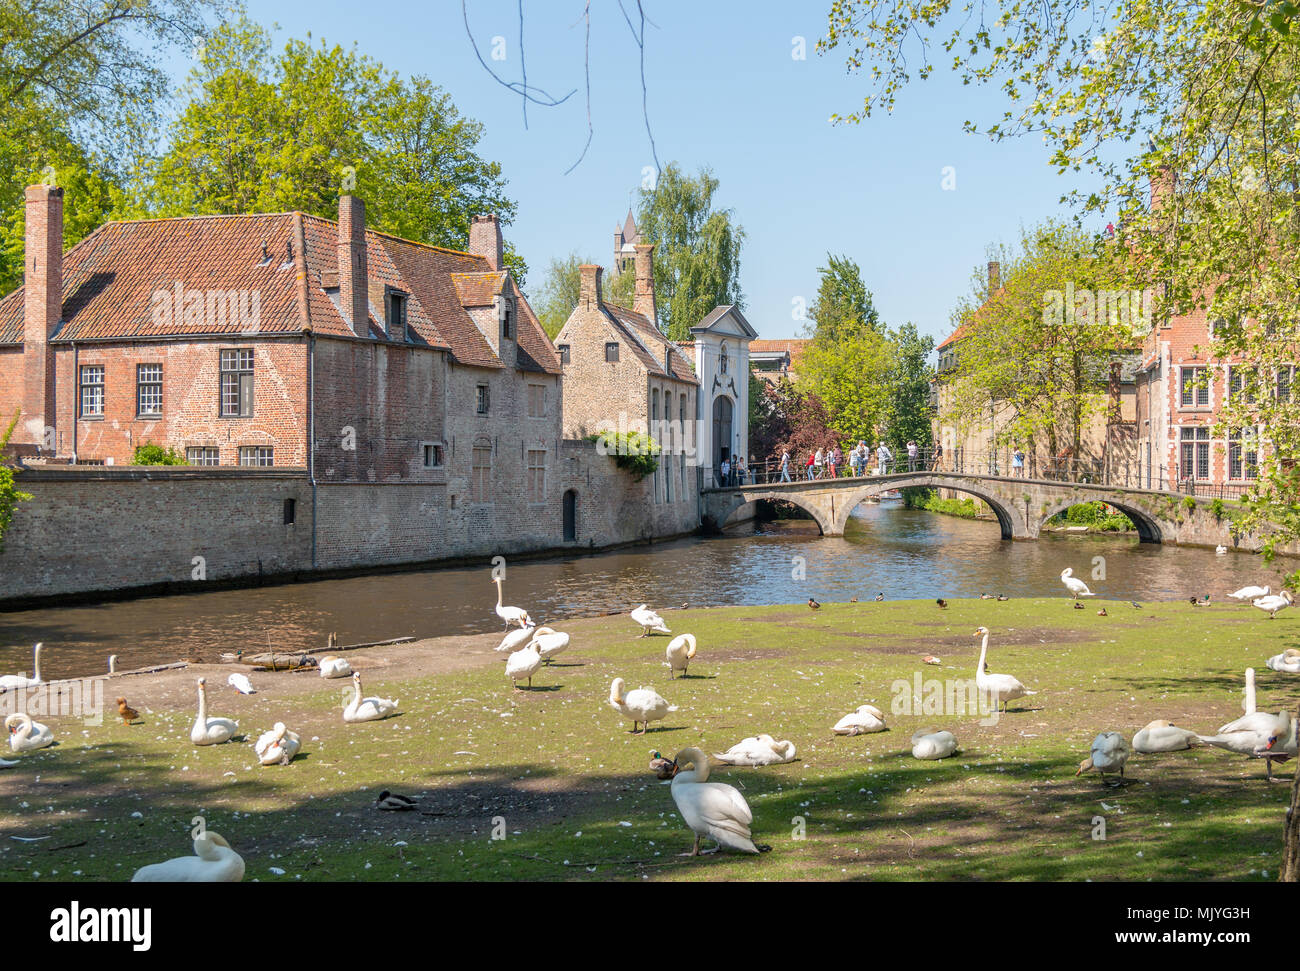 Bruges, Belgium - Mai 4, 2018: View on the Dijver river with the medieval beguinage on the background Stock Photo